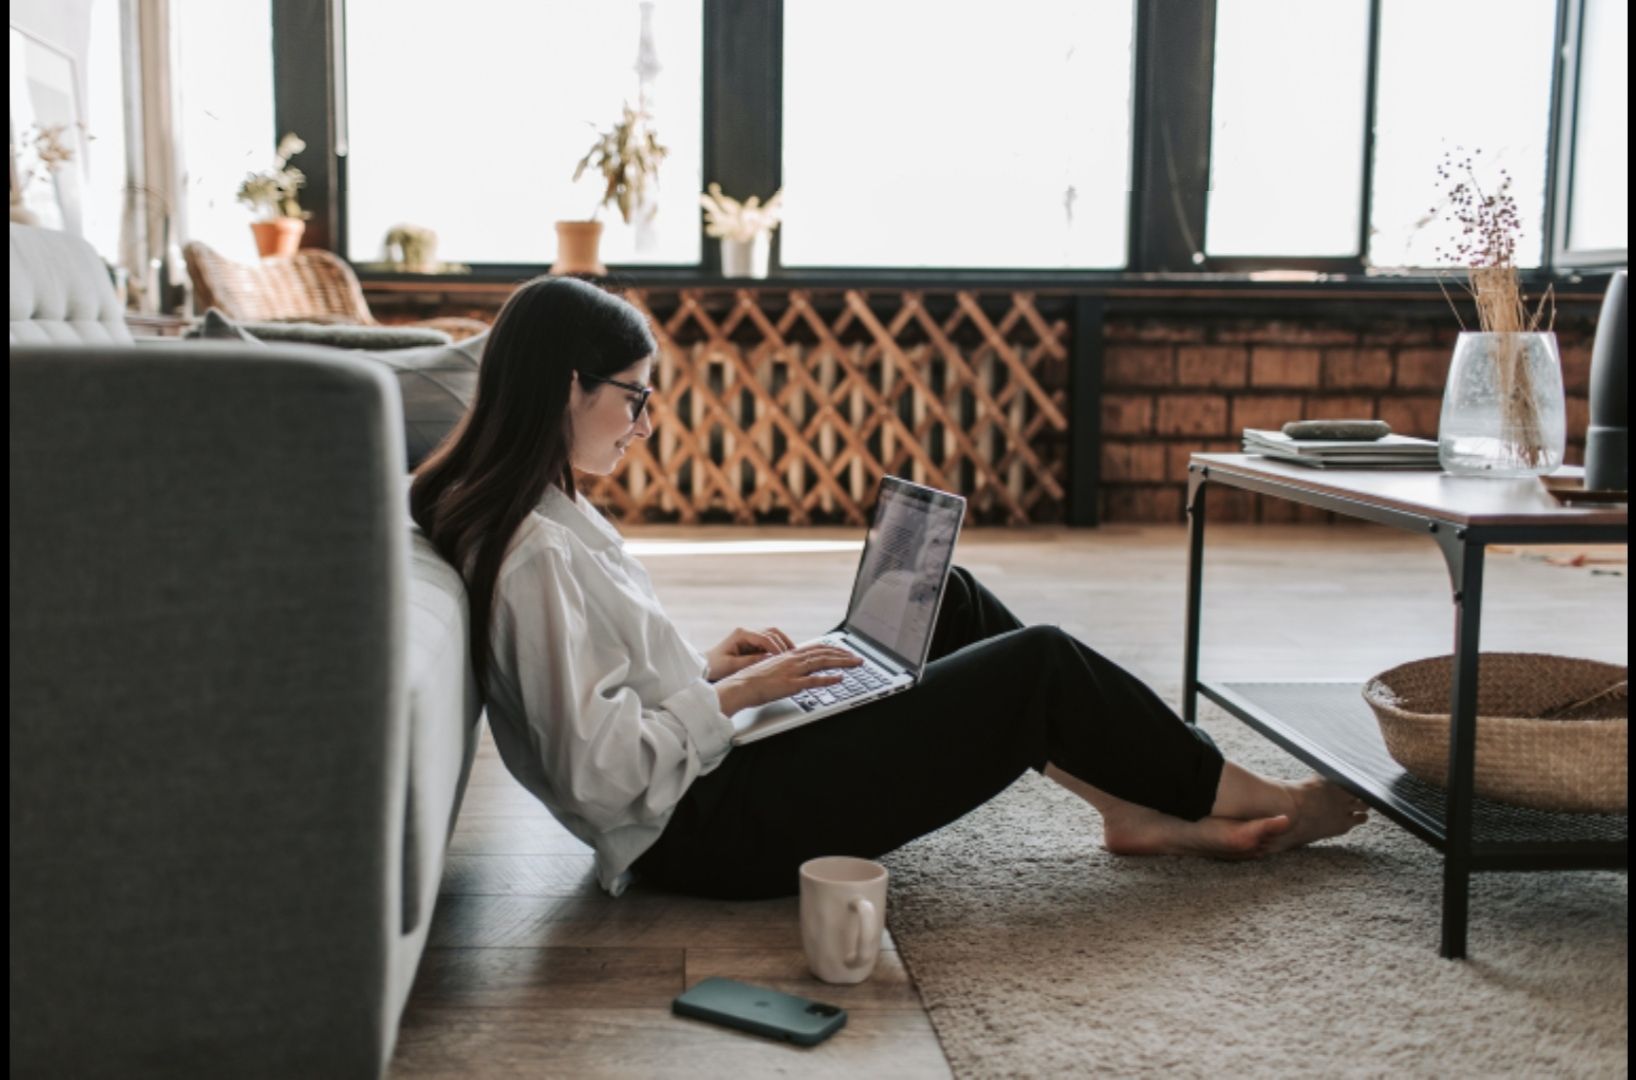 Photo by Vlada Karpovich: https://www.pexels.com/photo/woman-seated-on-ground-working-on-her-laptop-4050296/